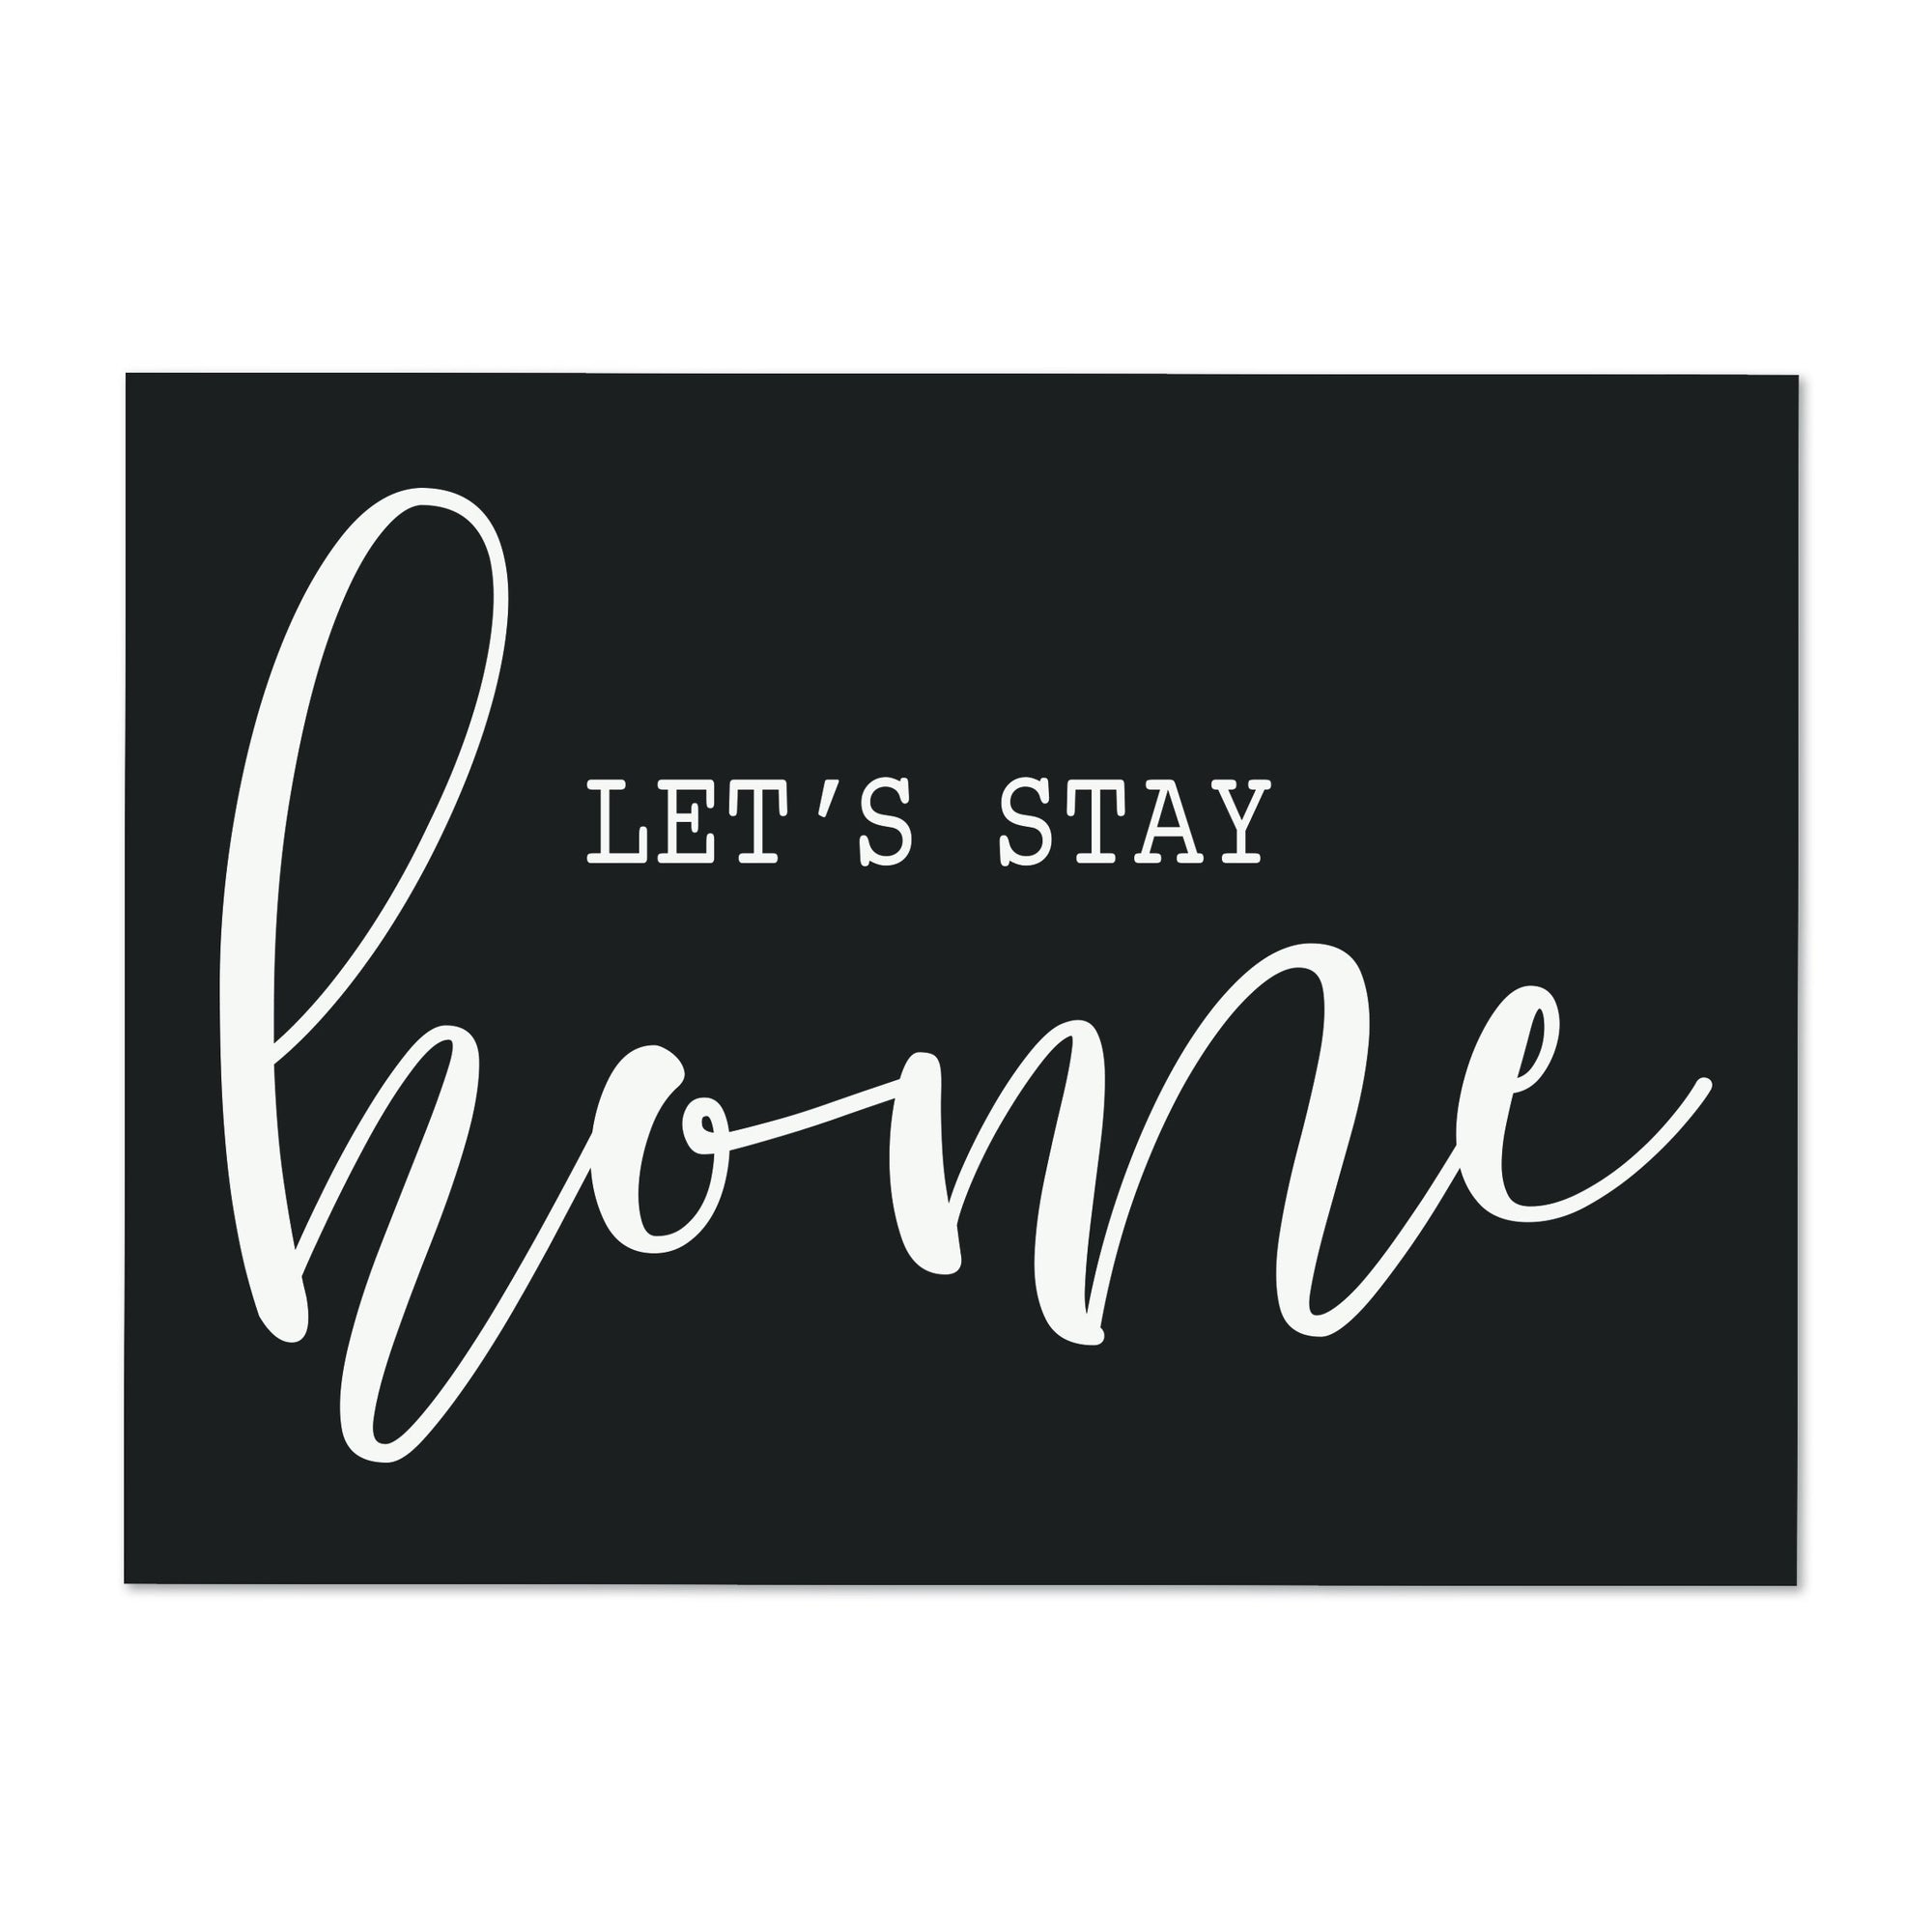 LifeSong Milestones Home Sign Wall Decorations for Living Room - Home Wall Art - Wooden Plaque Sign Gift 6“ x 8” Let's Stay Home Black